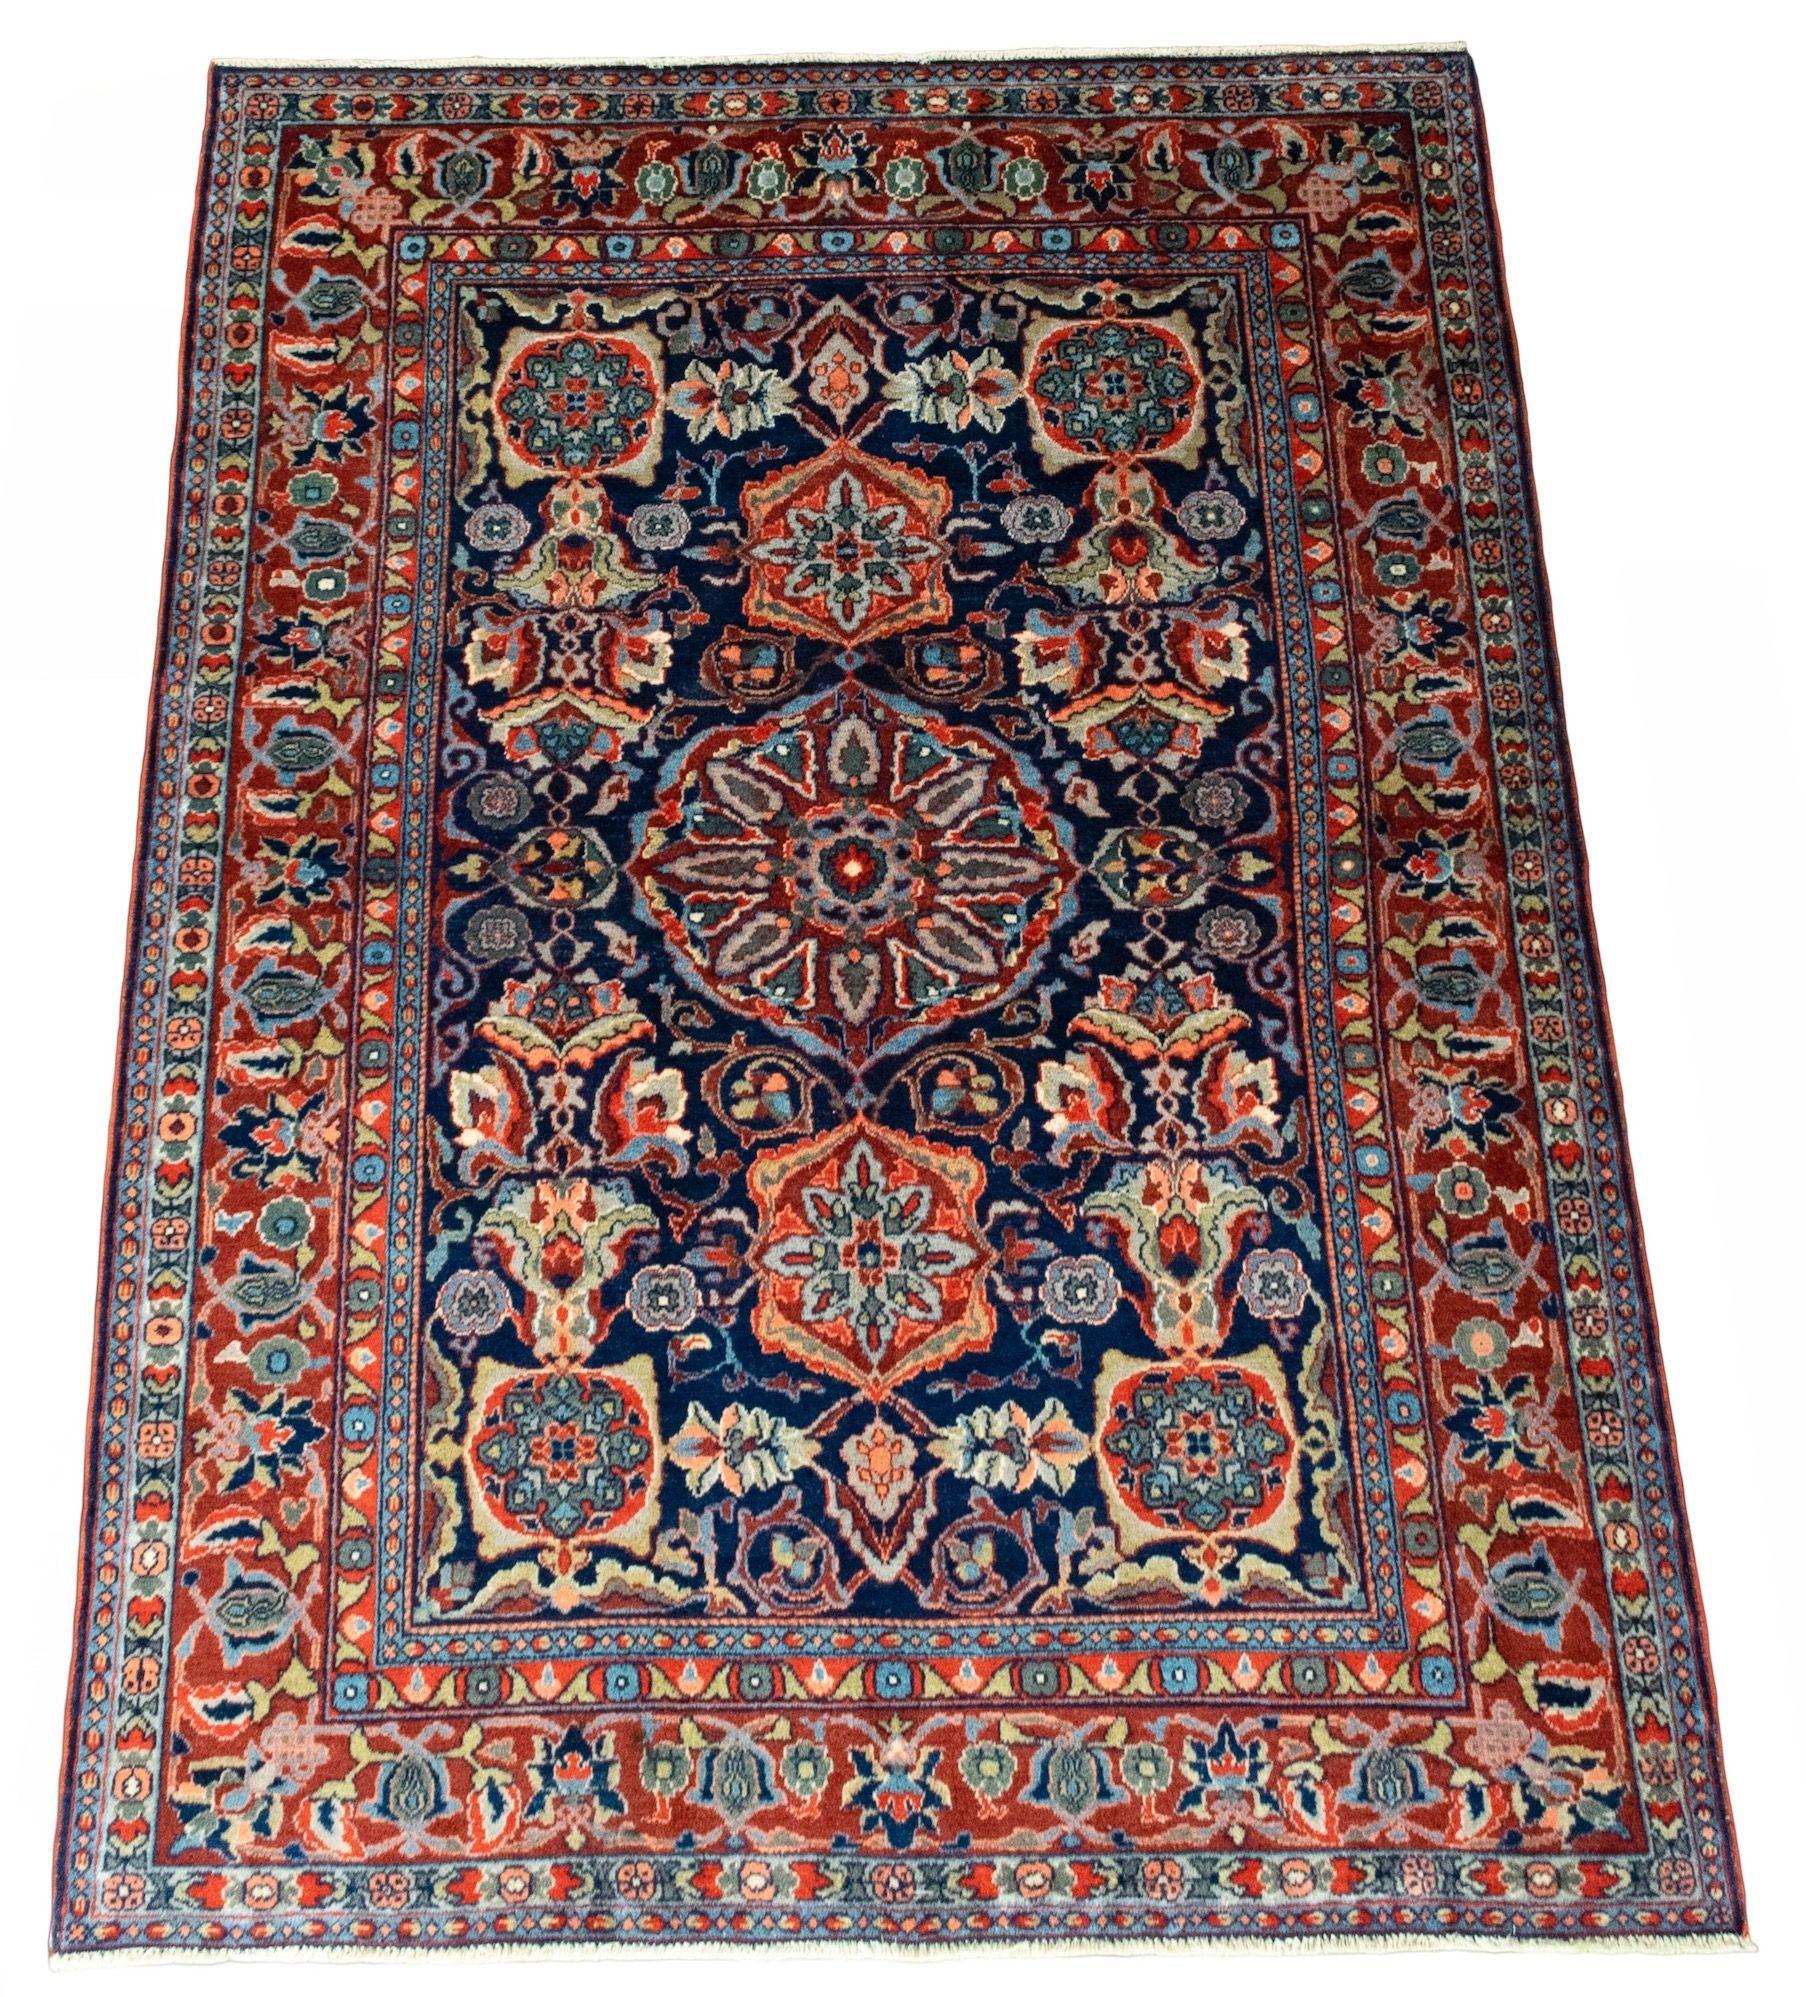 A beautiful antique Ardebil rug, hand woven circa 1920 with a floral design on a deep indigo field and red border. Wonderful secondary colours of greens, reds and blues and a highly decorative antique rug.
Size: 2.05m x 1.38m (6ft 9in x 4ft